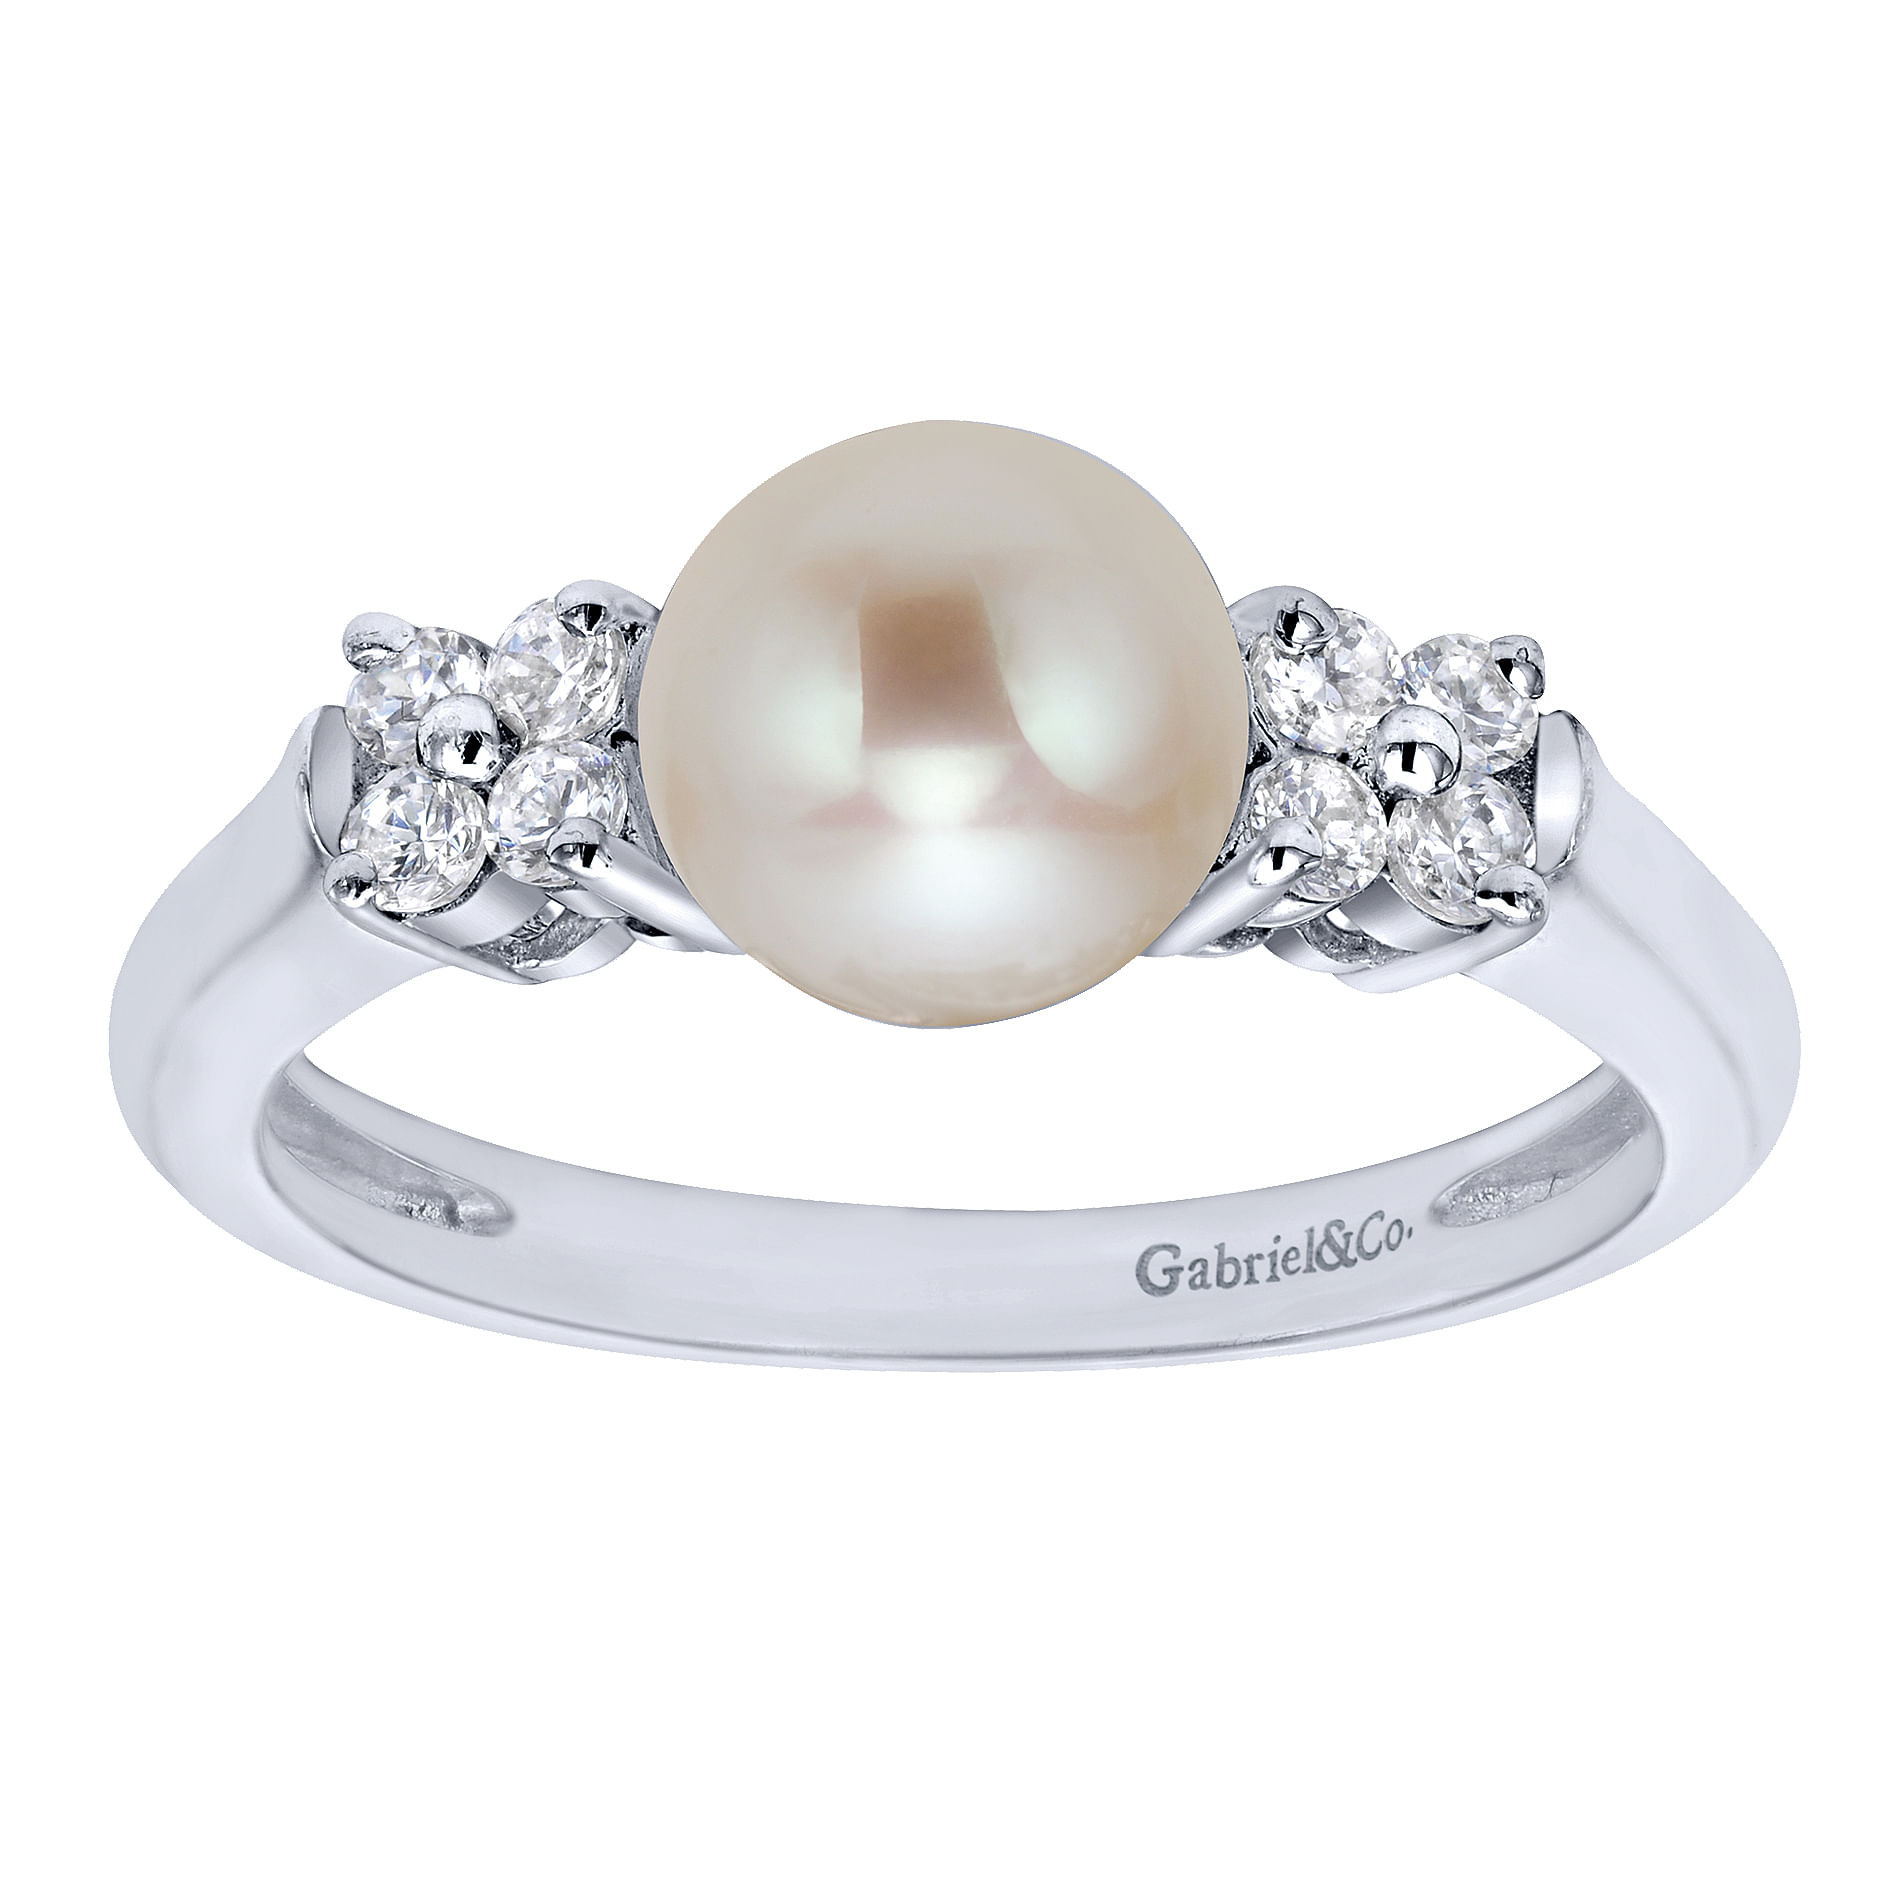 14K White Gold Ring with Pearl Center with Cluster Diamond Sides 